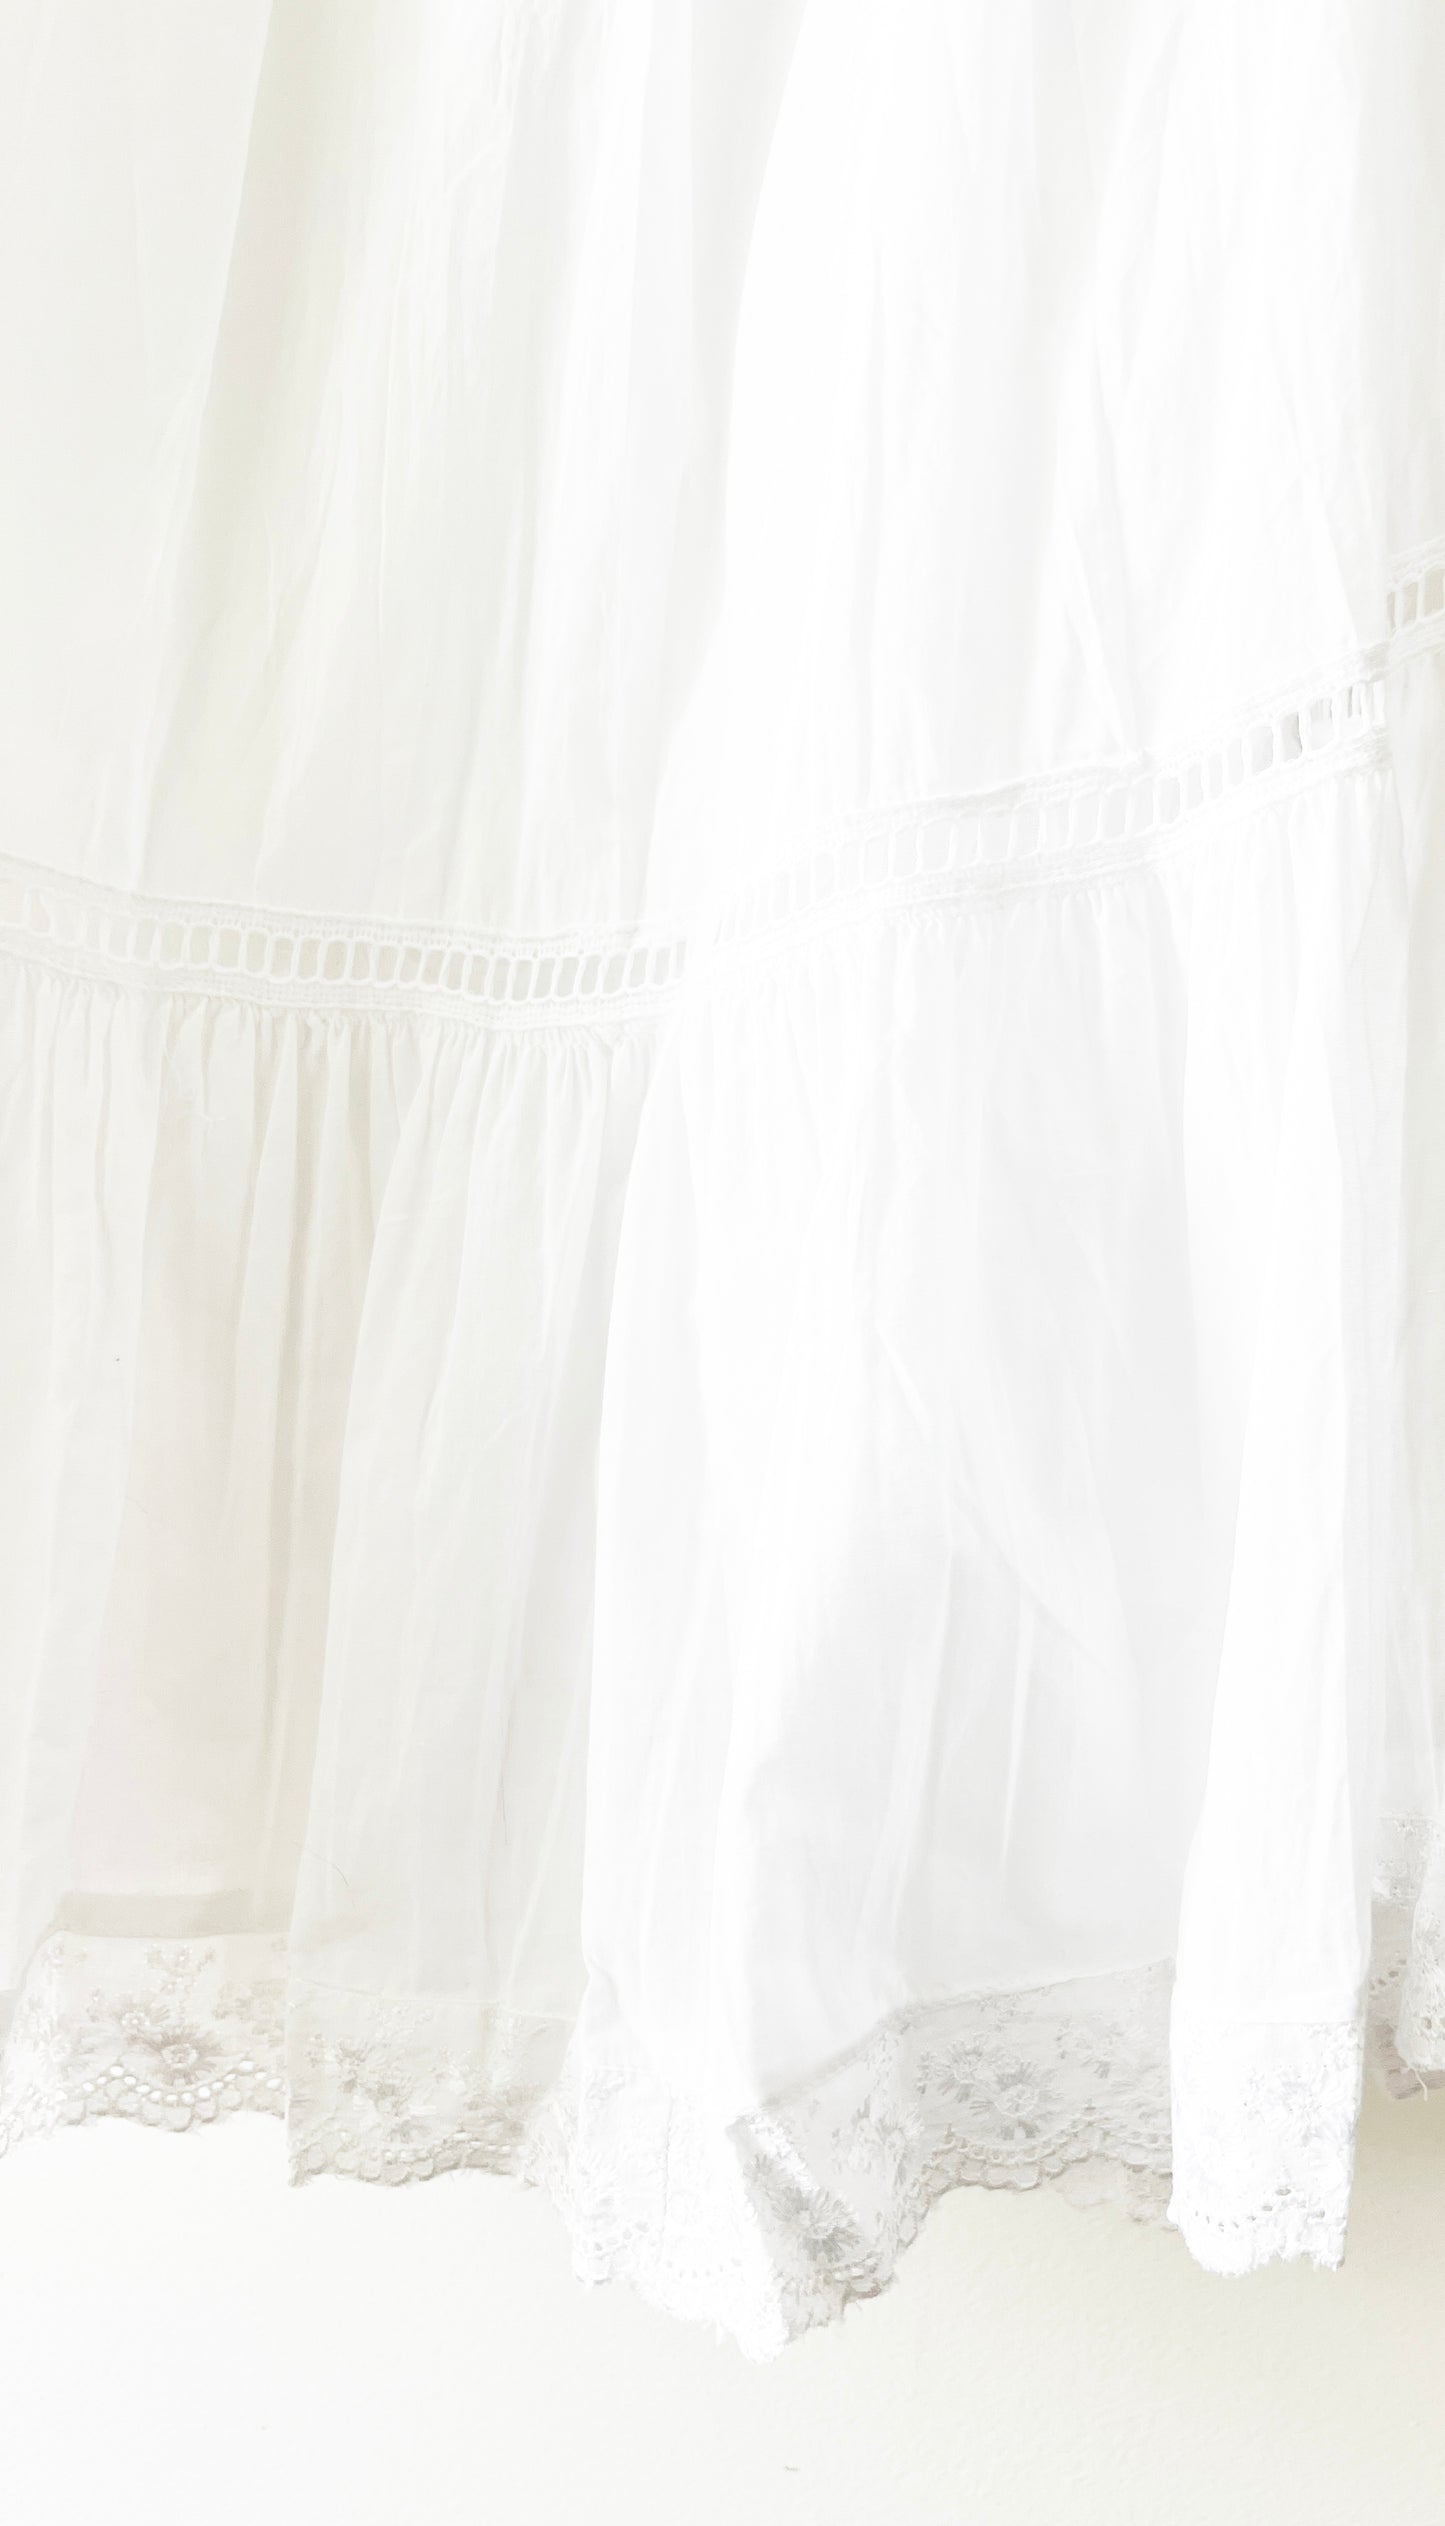 Vintage Boho White Tiered Lace Skirt